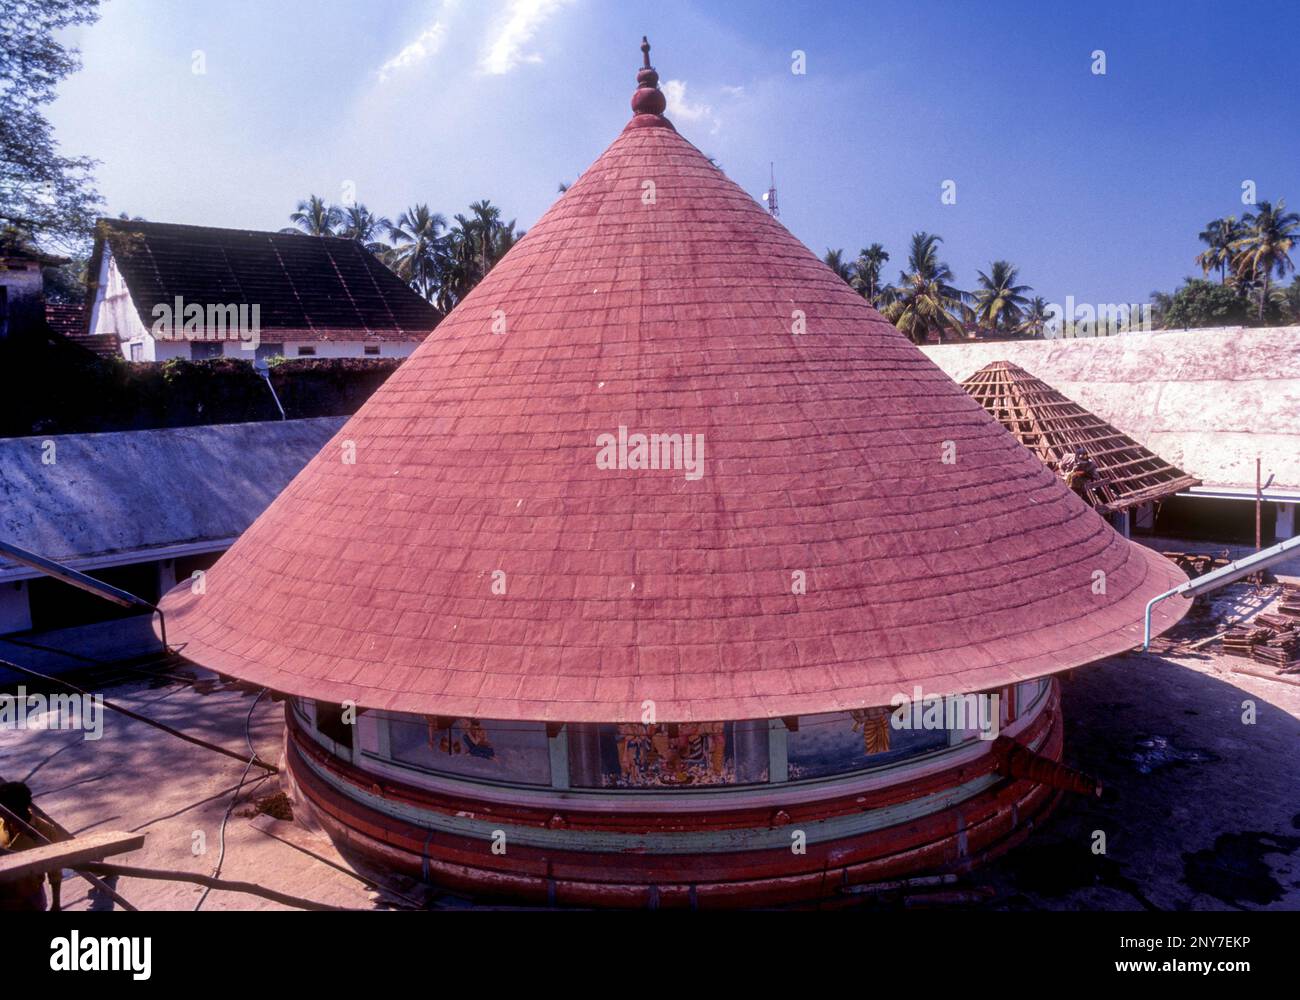 Reclaim Temples on Twitter The revised plan of Vaniyanur temple in  Malappuram Kerala which is being rebuilt KL001 ReclaimTemples  httpstcoOTUGMY1qFl  X